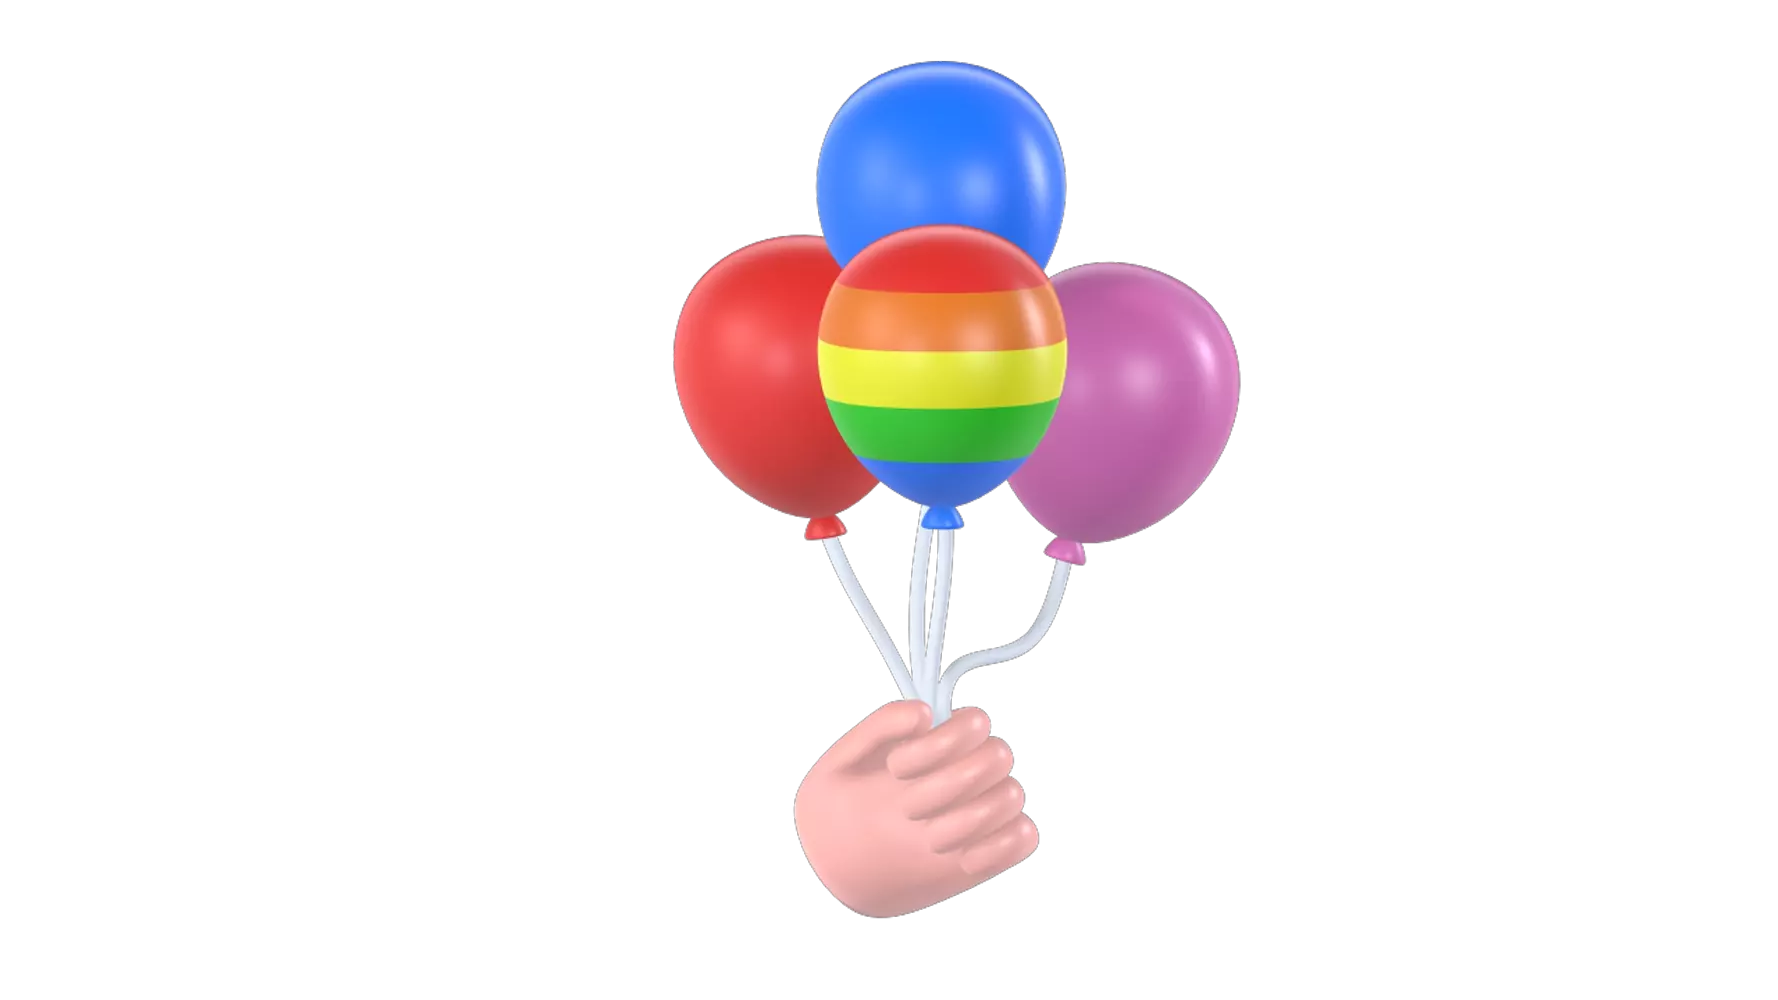 Balloons 3D Graphic